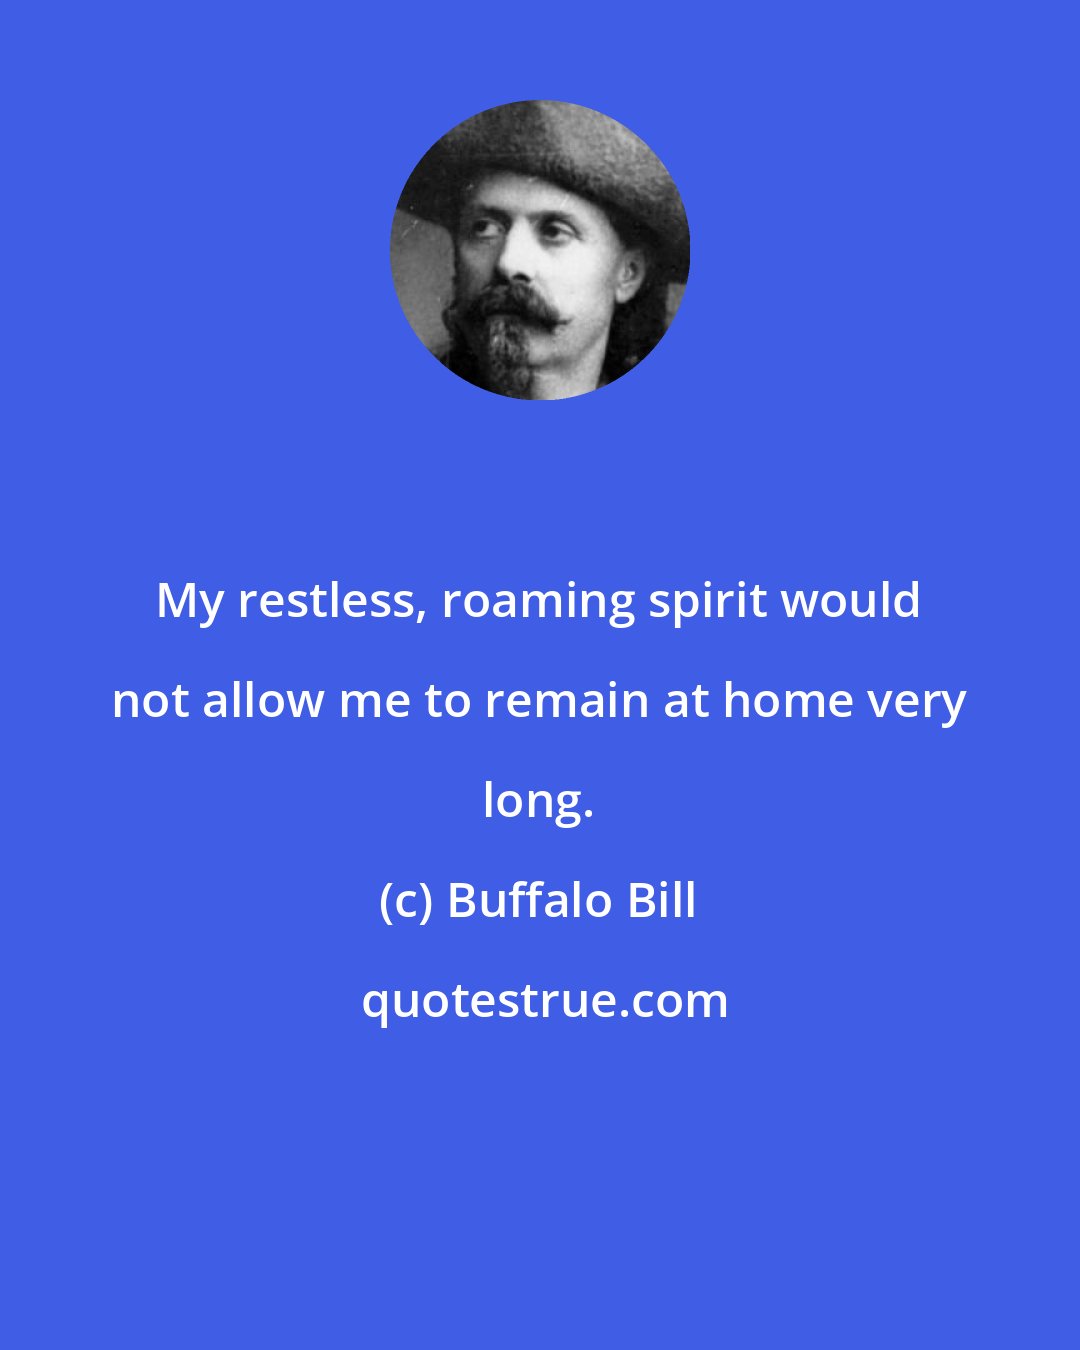 Buffalo Bill: My restless, roaming spirit would not allow me to remain at home very long.